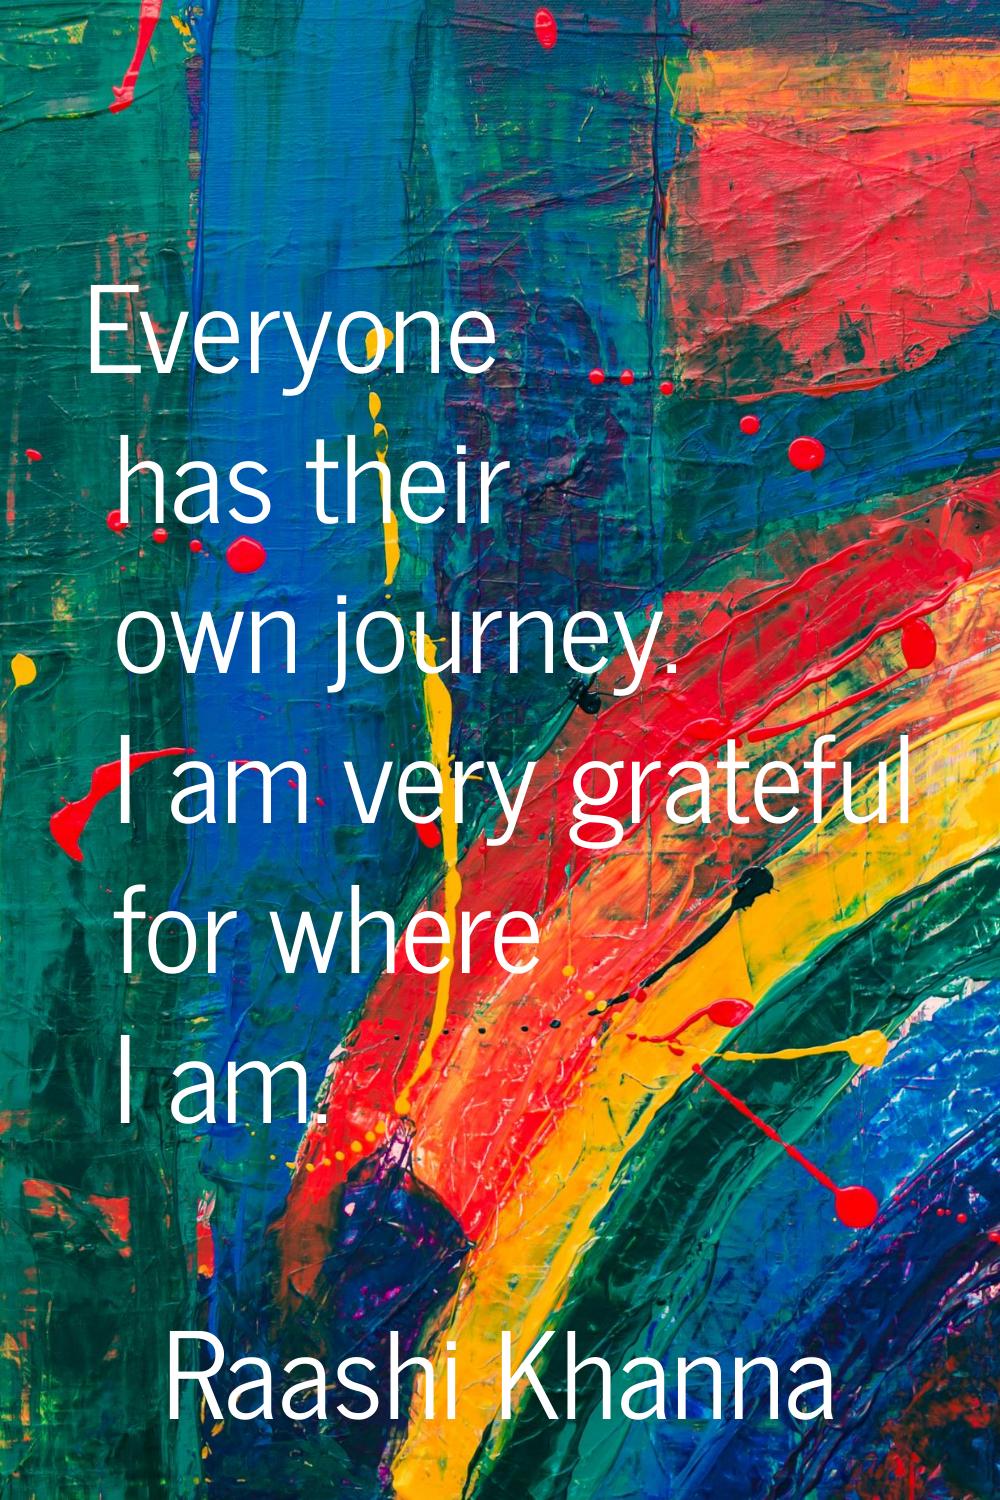 Everyone has their own journey. I am very grateful for where I am.